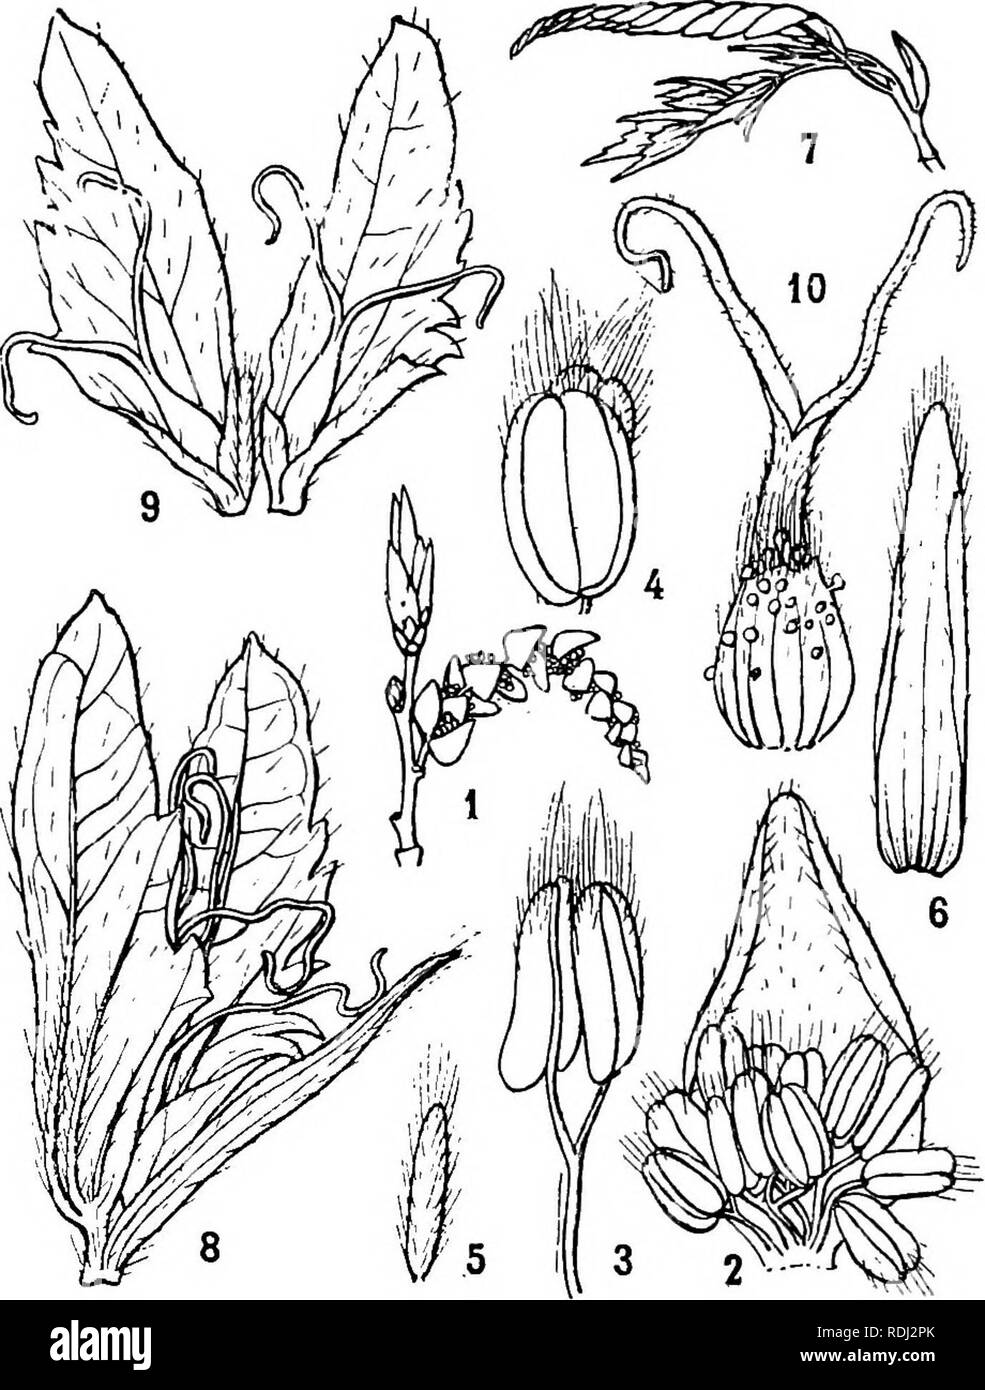 . Icones plantarum formosanarum nec non et contributiones ad floram formosanam; or, Icones of the plants of Formosa, and materials for a flora of the island, based on a study of the collections of the Botanical survey of the Government of Formosa. Botany. 176 CUPULIFEBiE.. Fig. 24. Carpmui Kawakamii Hayata. 1, male inflorescence; 2, a male flower; 3, 4, stamens; 7, u female inflorescence; 8, a pair of female flowers; 9, the same, expanded; 10. u, female flower, bracts taken ofE. Kg. 1, and 7 natural size; others are more or less magnified. Spicse laxiflorse, fructiferse 4 cm. longse, fmctibus  Stock Photo